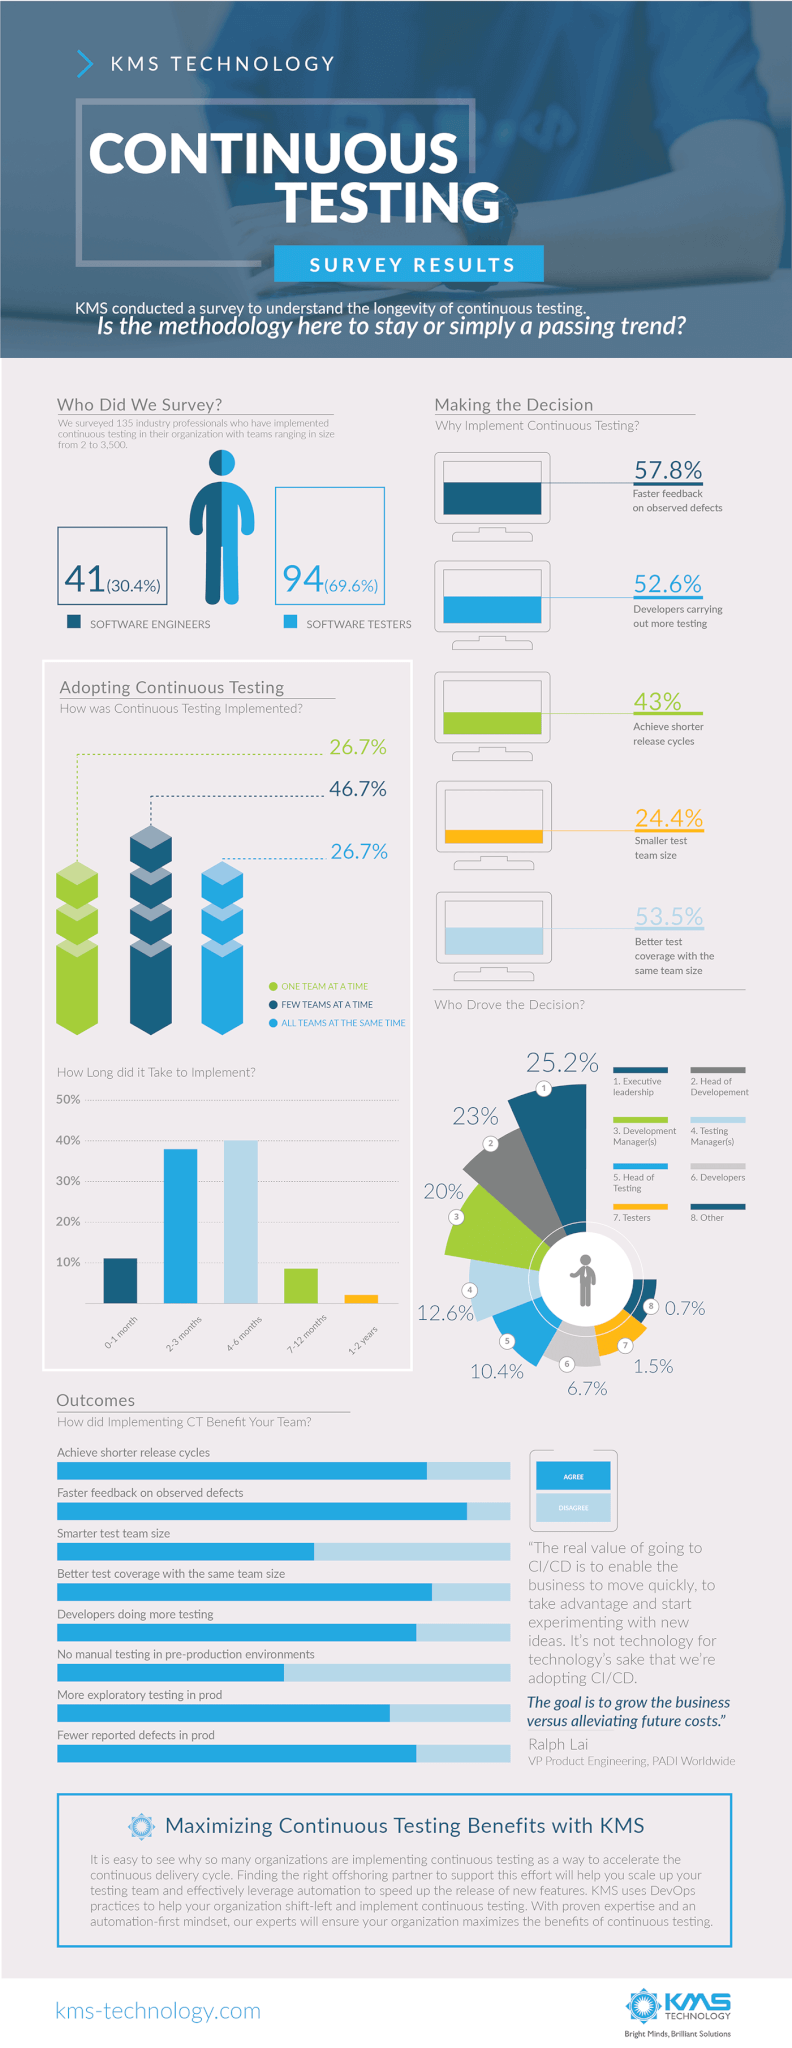 The continuous testing infographic includes the demographics of the 135 industry professionals surveyed. There were 41 software engineers and 94 software testers from companies ranging from 2-3,500. When deciding to implement continuous testing, 57.5% did so for faster feedback on observed defects, 52.6% so Developers could carry out more testing, 43% to achieve shorter release cycles, 24.4% for smaller test teams, and 53.5% for better test coverage with the same team size. Executive leadership drove the decision 25.2% of the time, Head of development 23%, Development managers 20%, Testing Managers 12.6%, Head of Testing 10.4%, Developers 6.7%, Testers 1.5%, and Other 0.7%. Continuous testing was implemented one team at a time for 26.7% of companies, a few teams at a time for 46.7% of companies, and all teams at the same time for 26.7% of companies. The process took less than 1 month for 11%, 2-3 months for 38%, 4-6 months for 40%, 7-12 months for 9%, and 1-2 years for 2%. Most people agreed that continuous testing helped them to achieve shorter release cycles, faster feedback on observed defects, smaller test team size, better test coverage with the same team size, developers doing more testing, no manual testing in pre-prod, more exploratory testing in prod, and fewer reported defects in prod. 